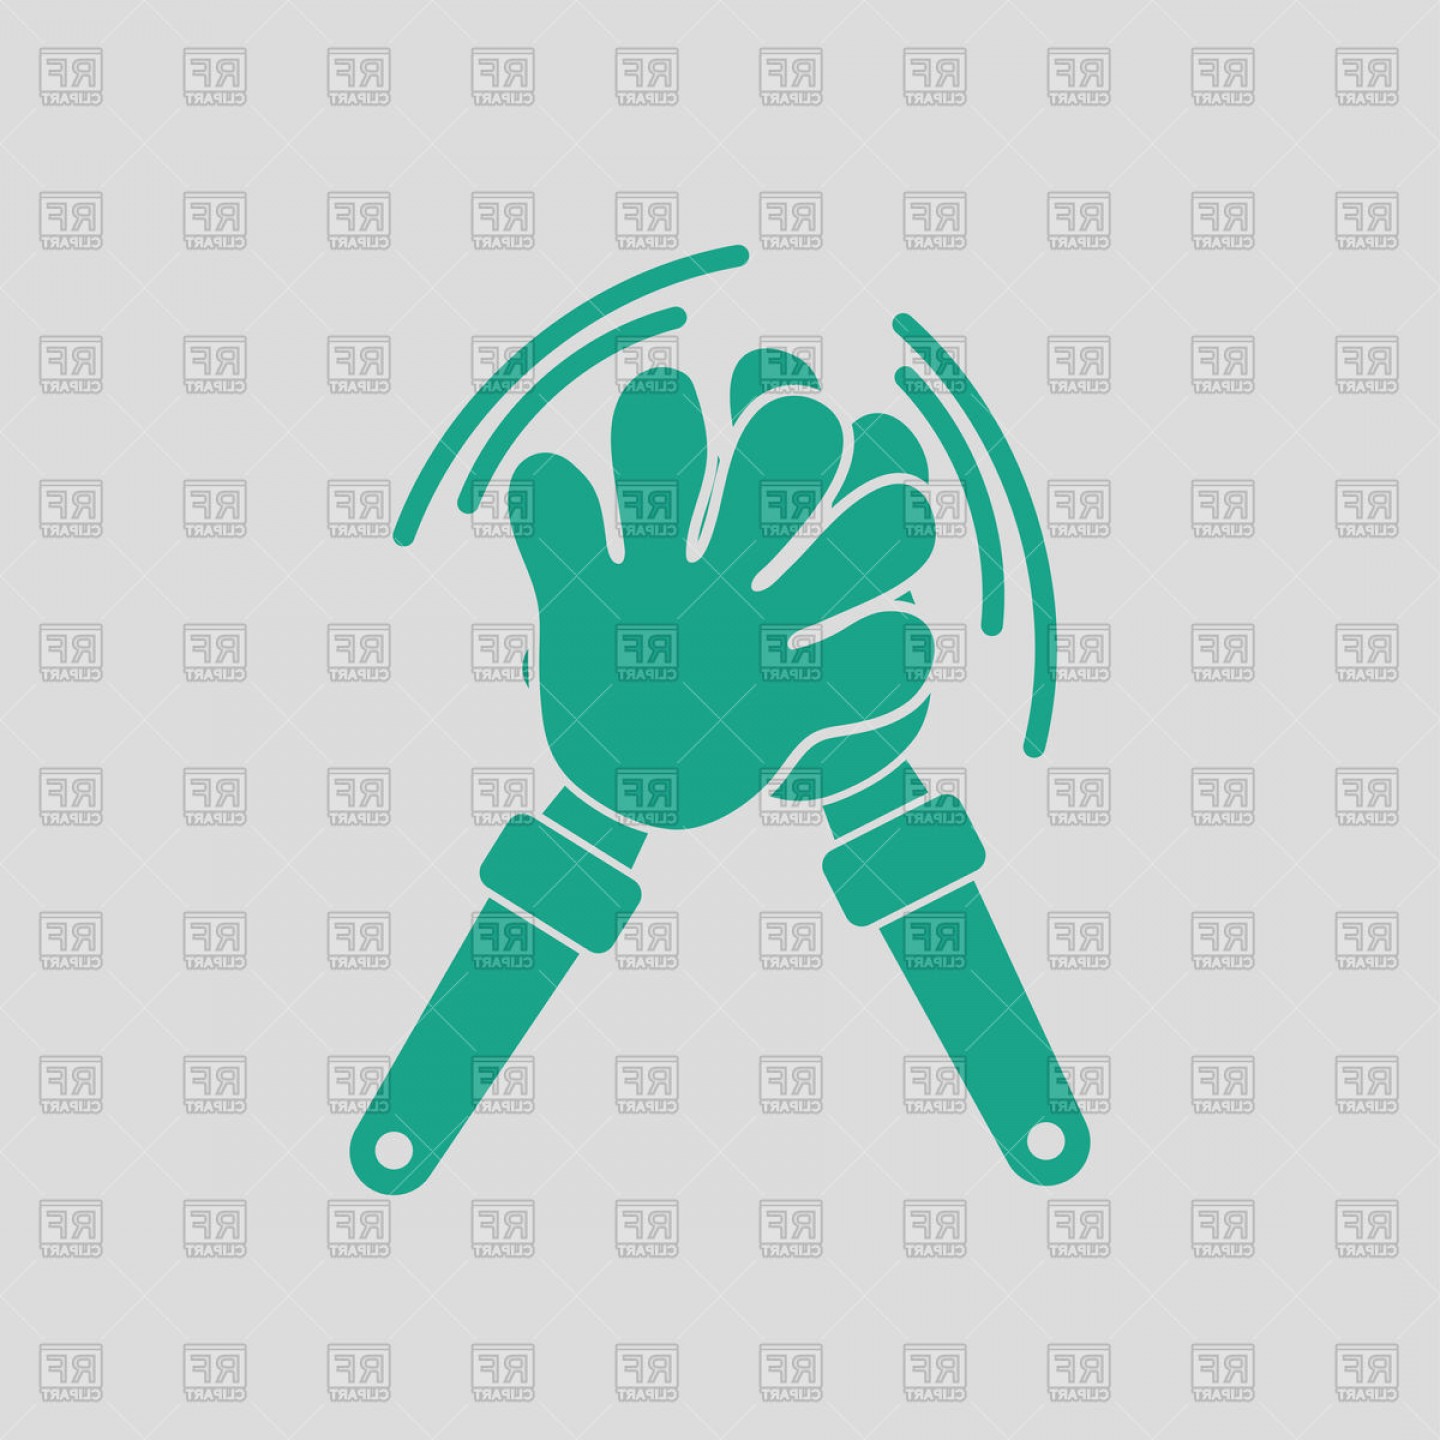 Clapping Hands Vector at Vectorified.com | Collection of Clapping Hands ...